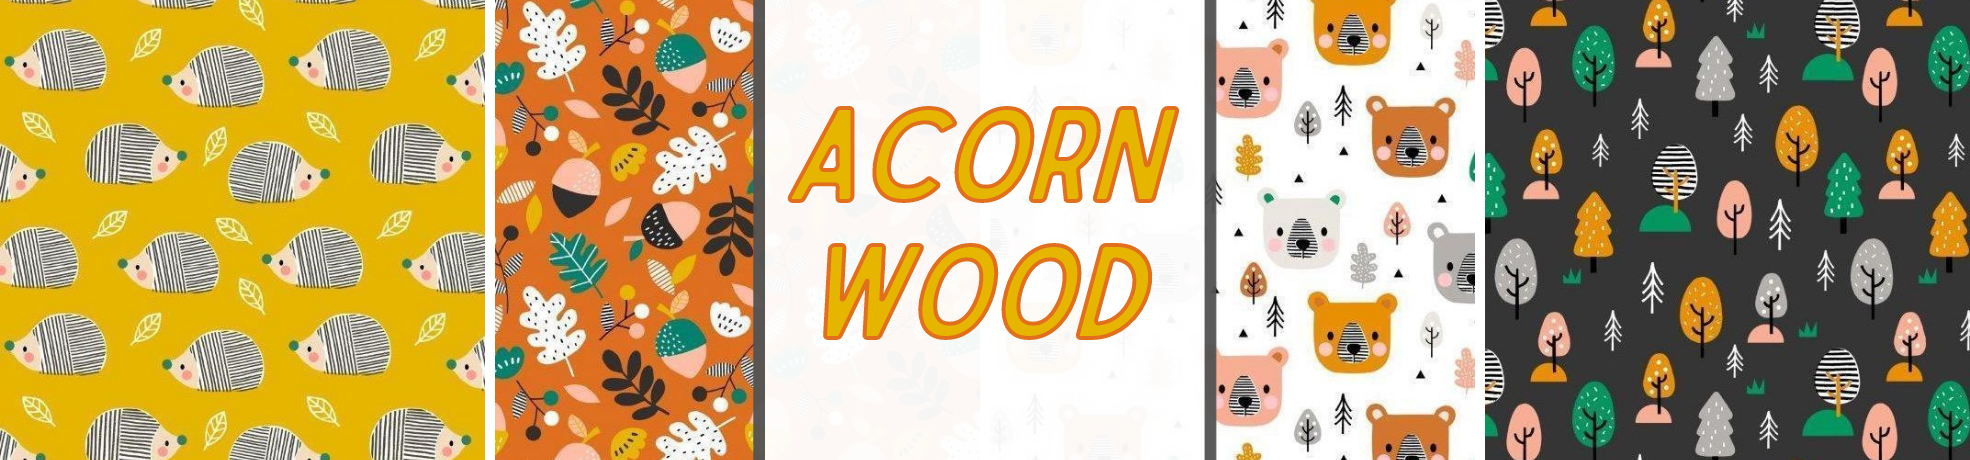 Acorn Wood Fabric Collection